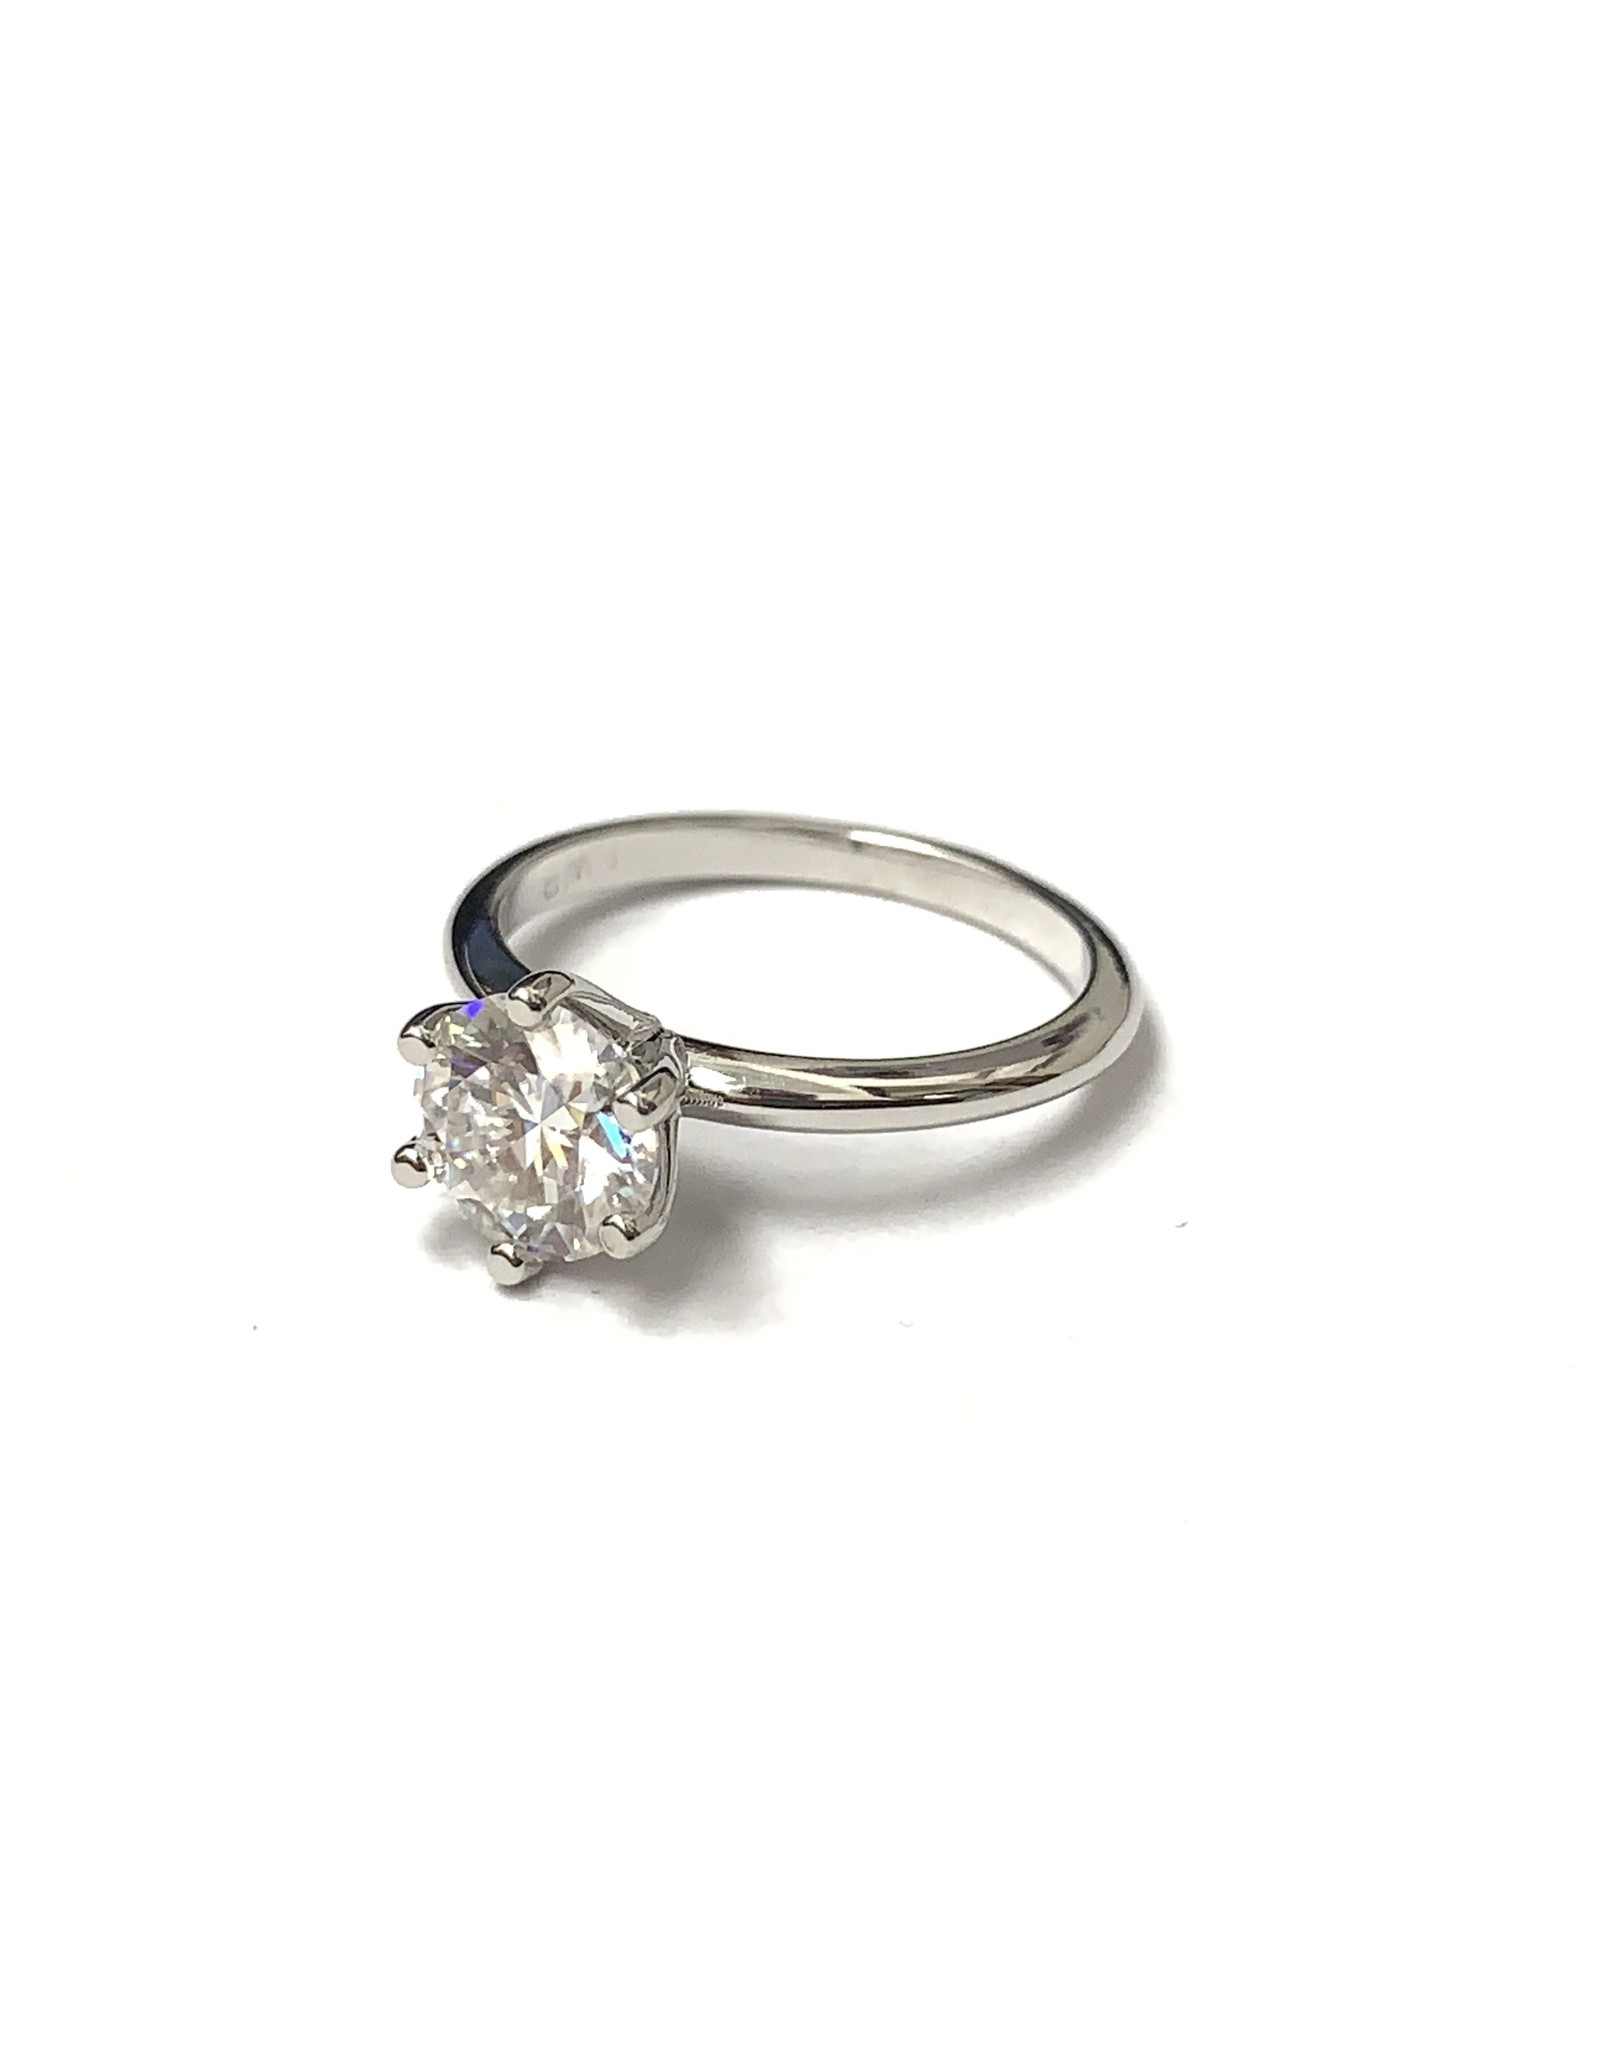 7mm Moissanite Solitaire Ring 14KW